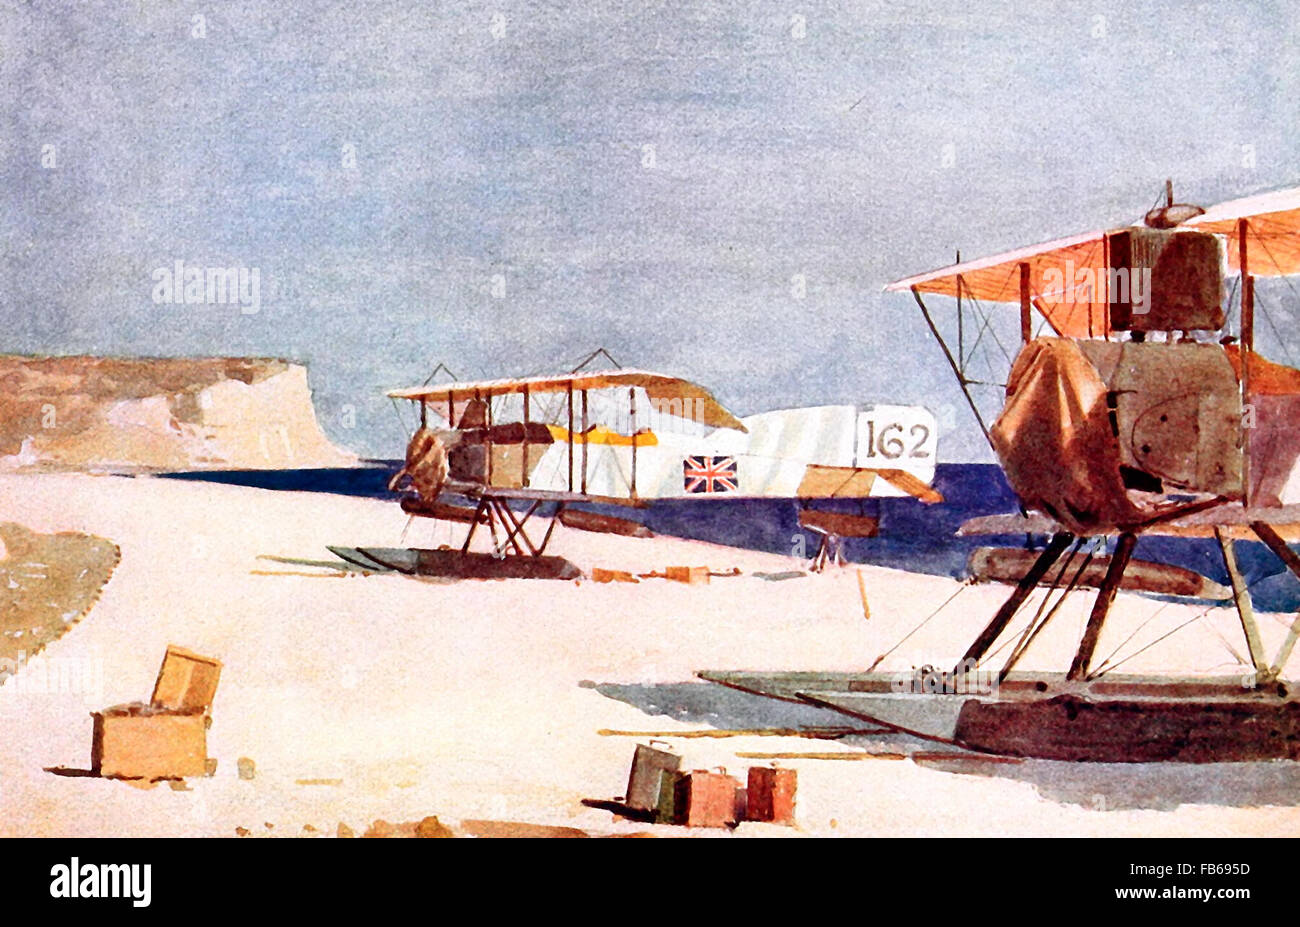 Seaplanes at Kephalo during the Dardanelles Campaign, 1915. World War I Stock Photo